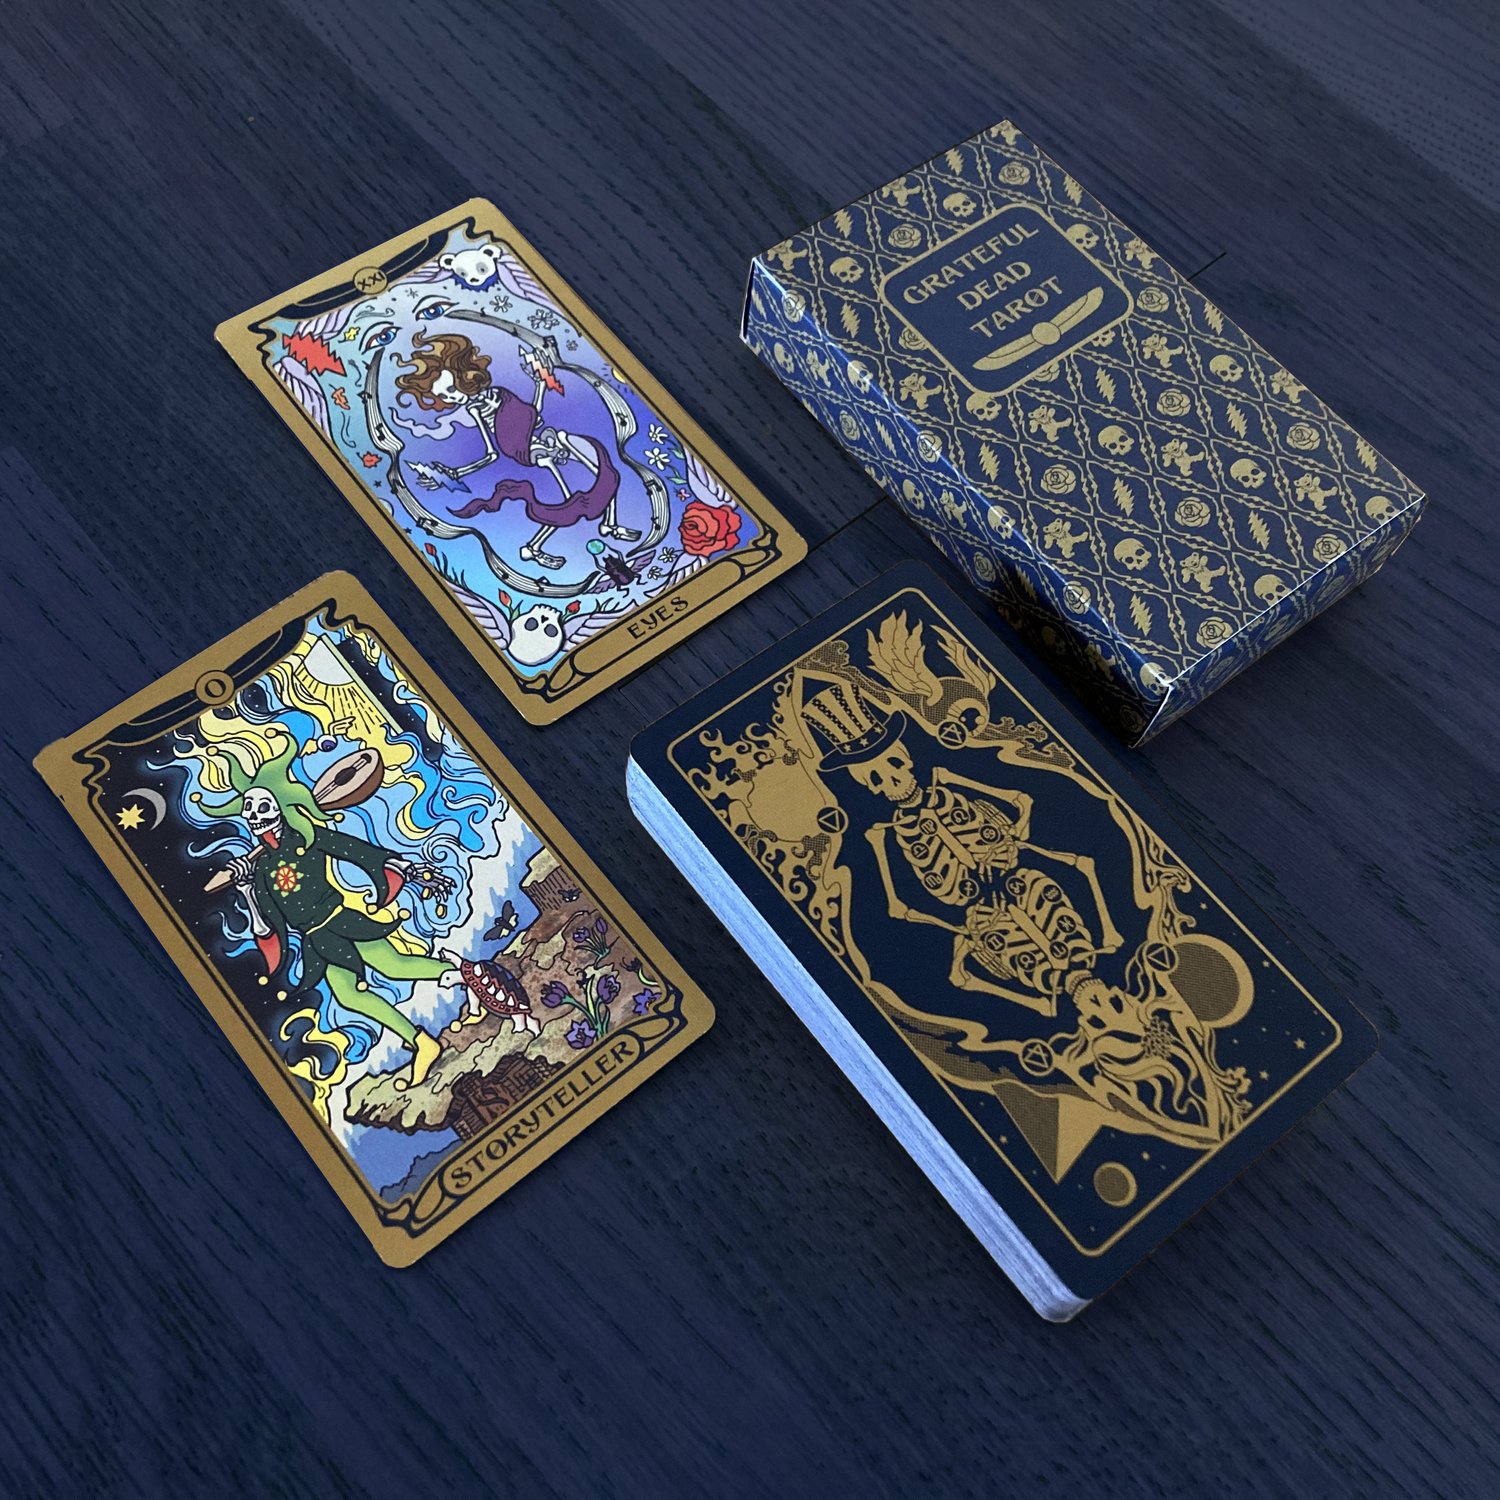 Set of 6] Tarot: Death - Blank 4x6 Folding Cards with Envelopes